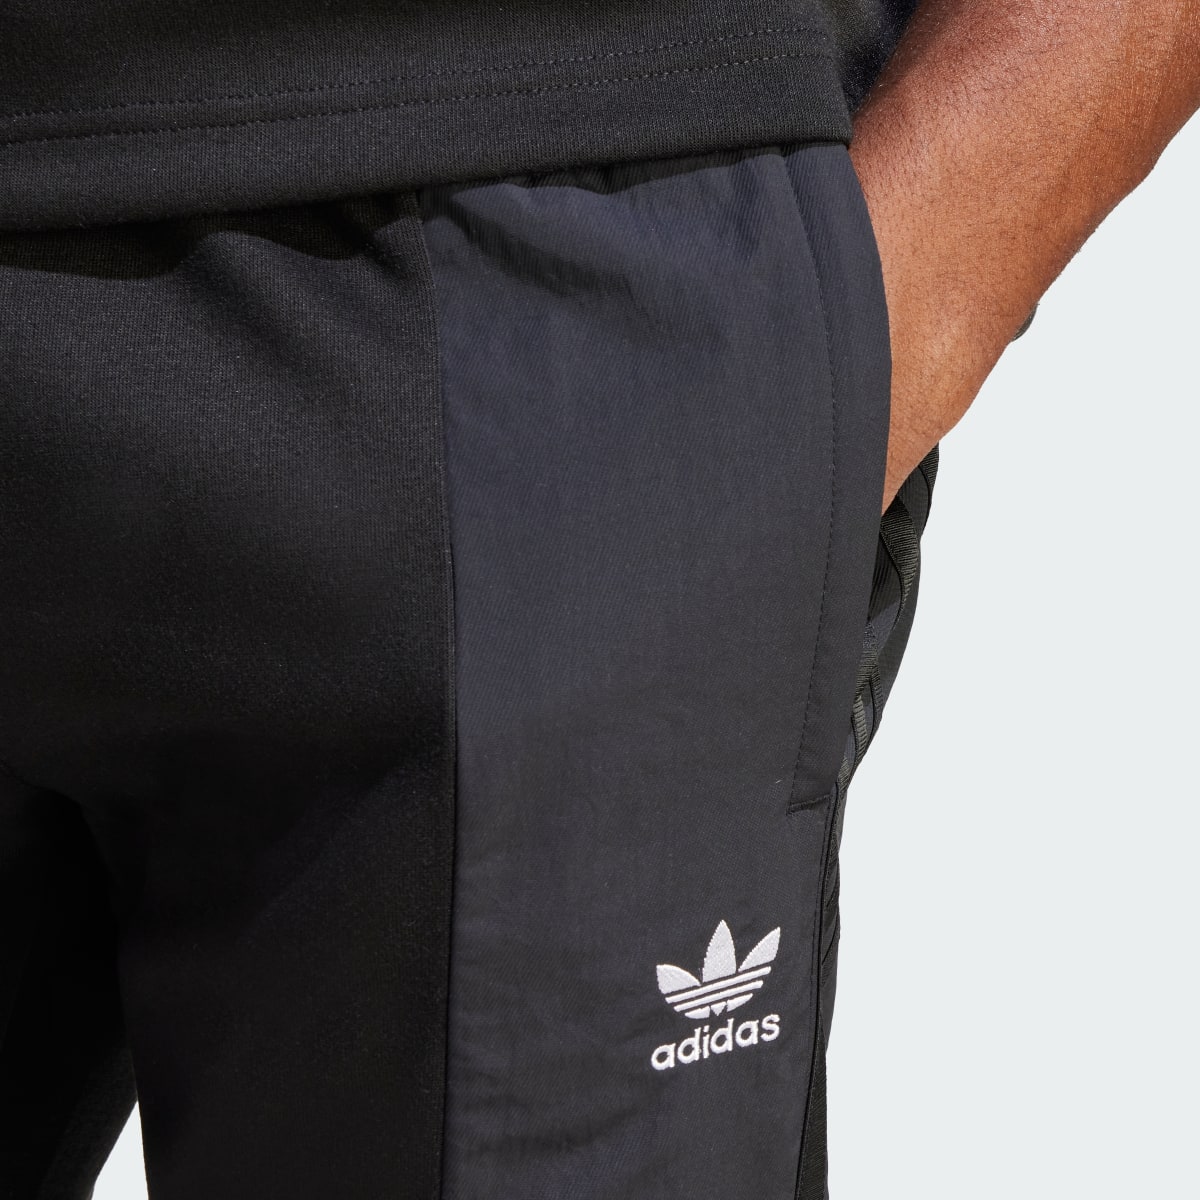 Adidas Adicolor Re-Pro SST Material Mix Track Pants. 5